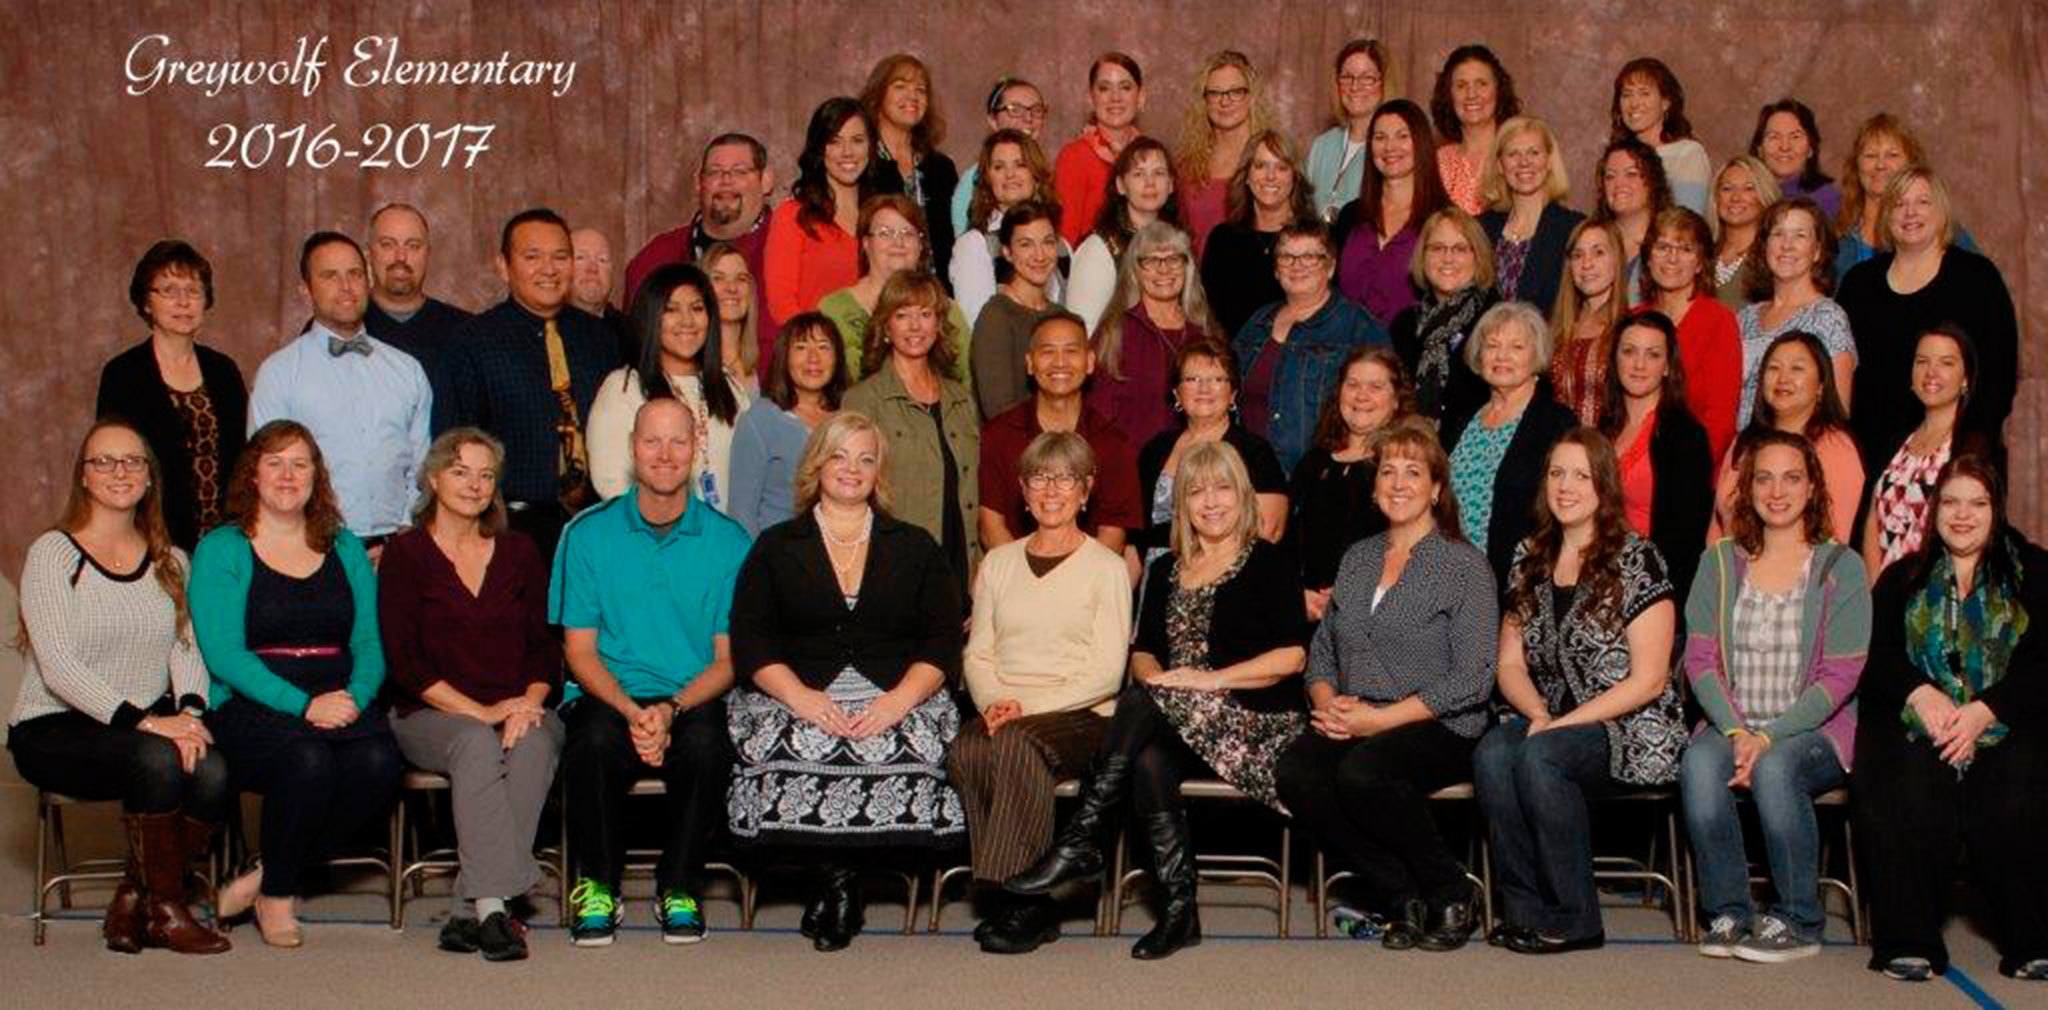 Greywolf Elementary School staff earned distinction as a National Title I Distinguished School after using federal funds to improve the education for economically disadvantaged students. Submitted photo